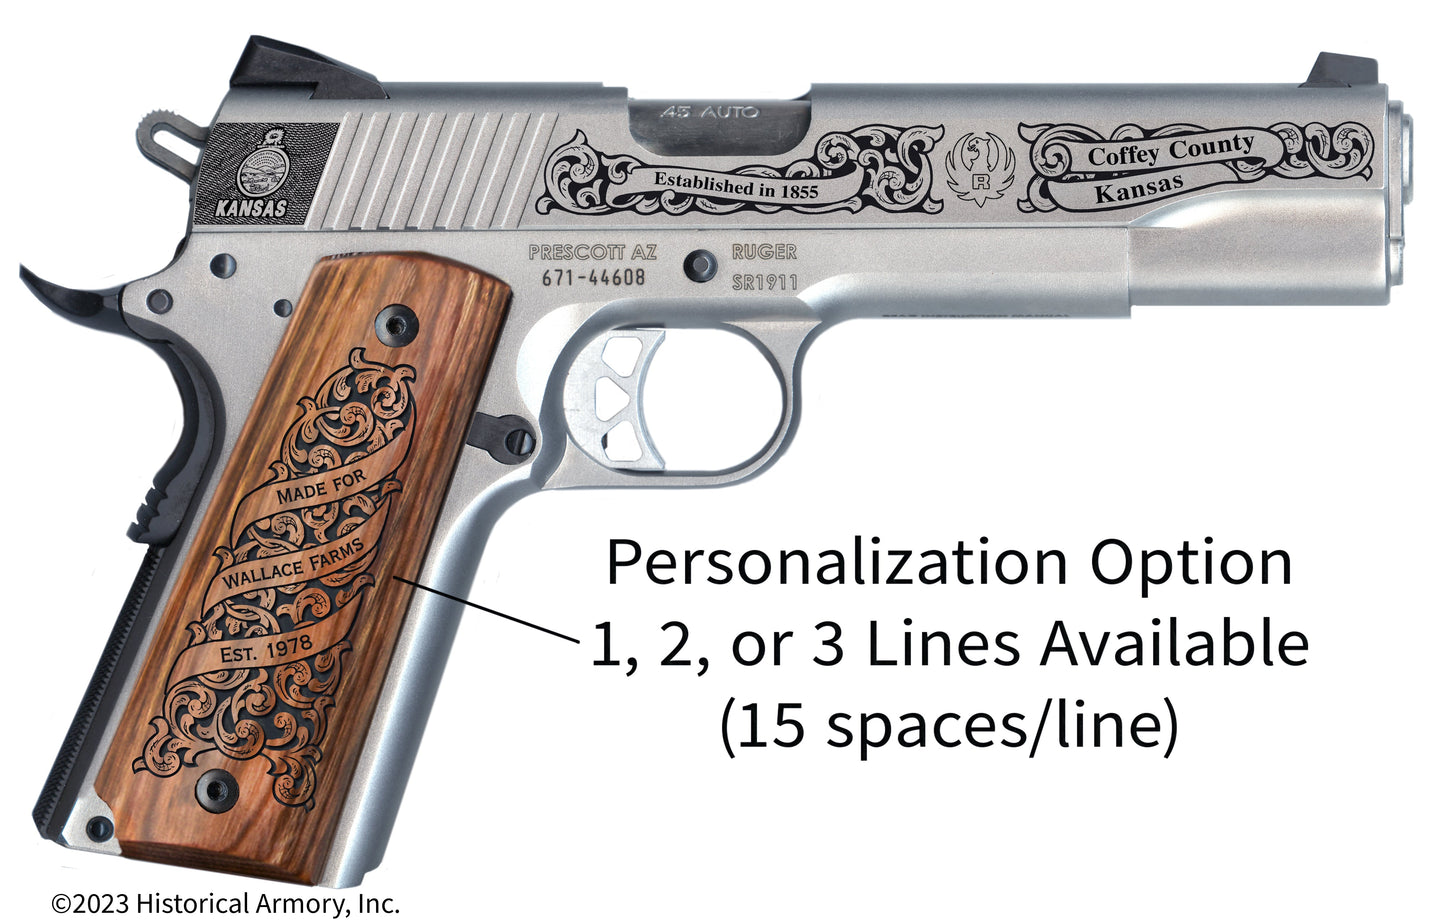 Coffey County Kansas Personalized Engraved .45 Auto Ruger 1911